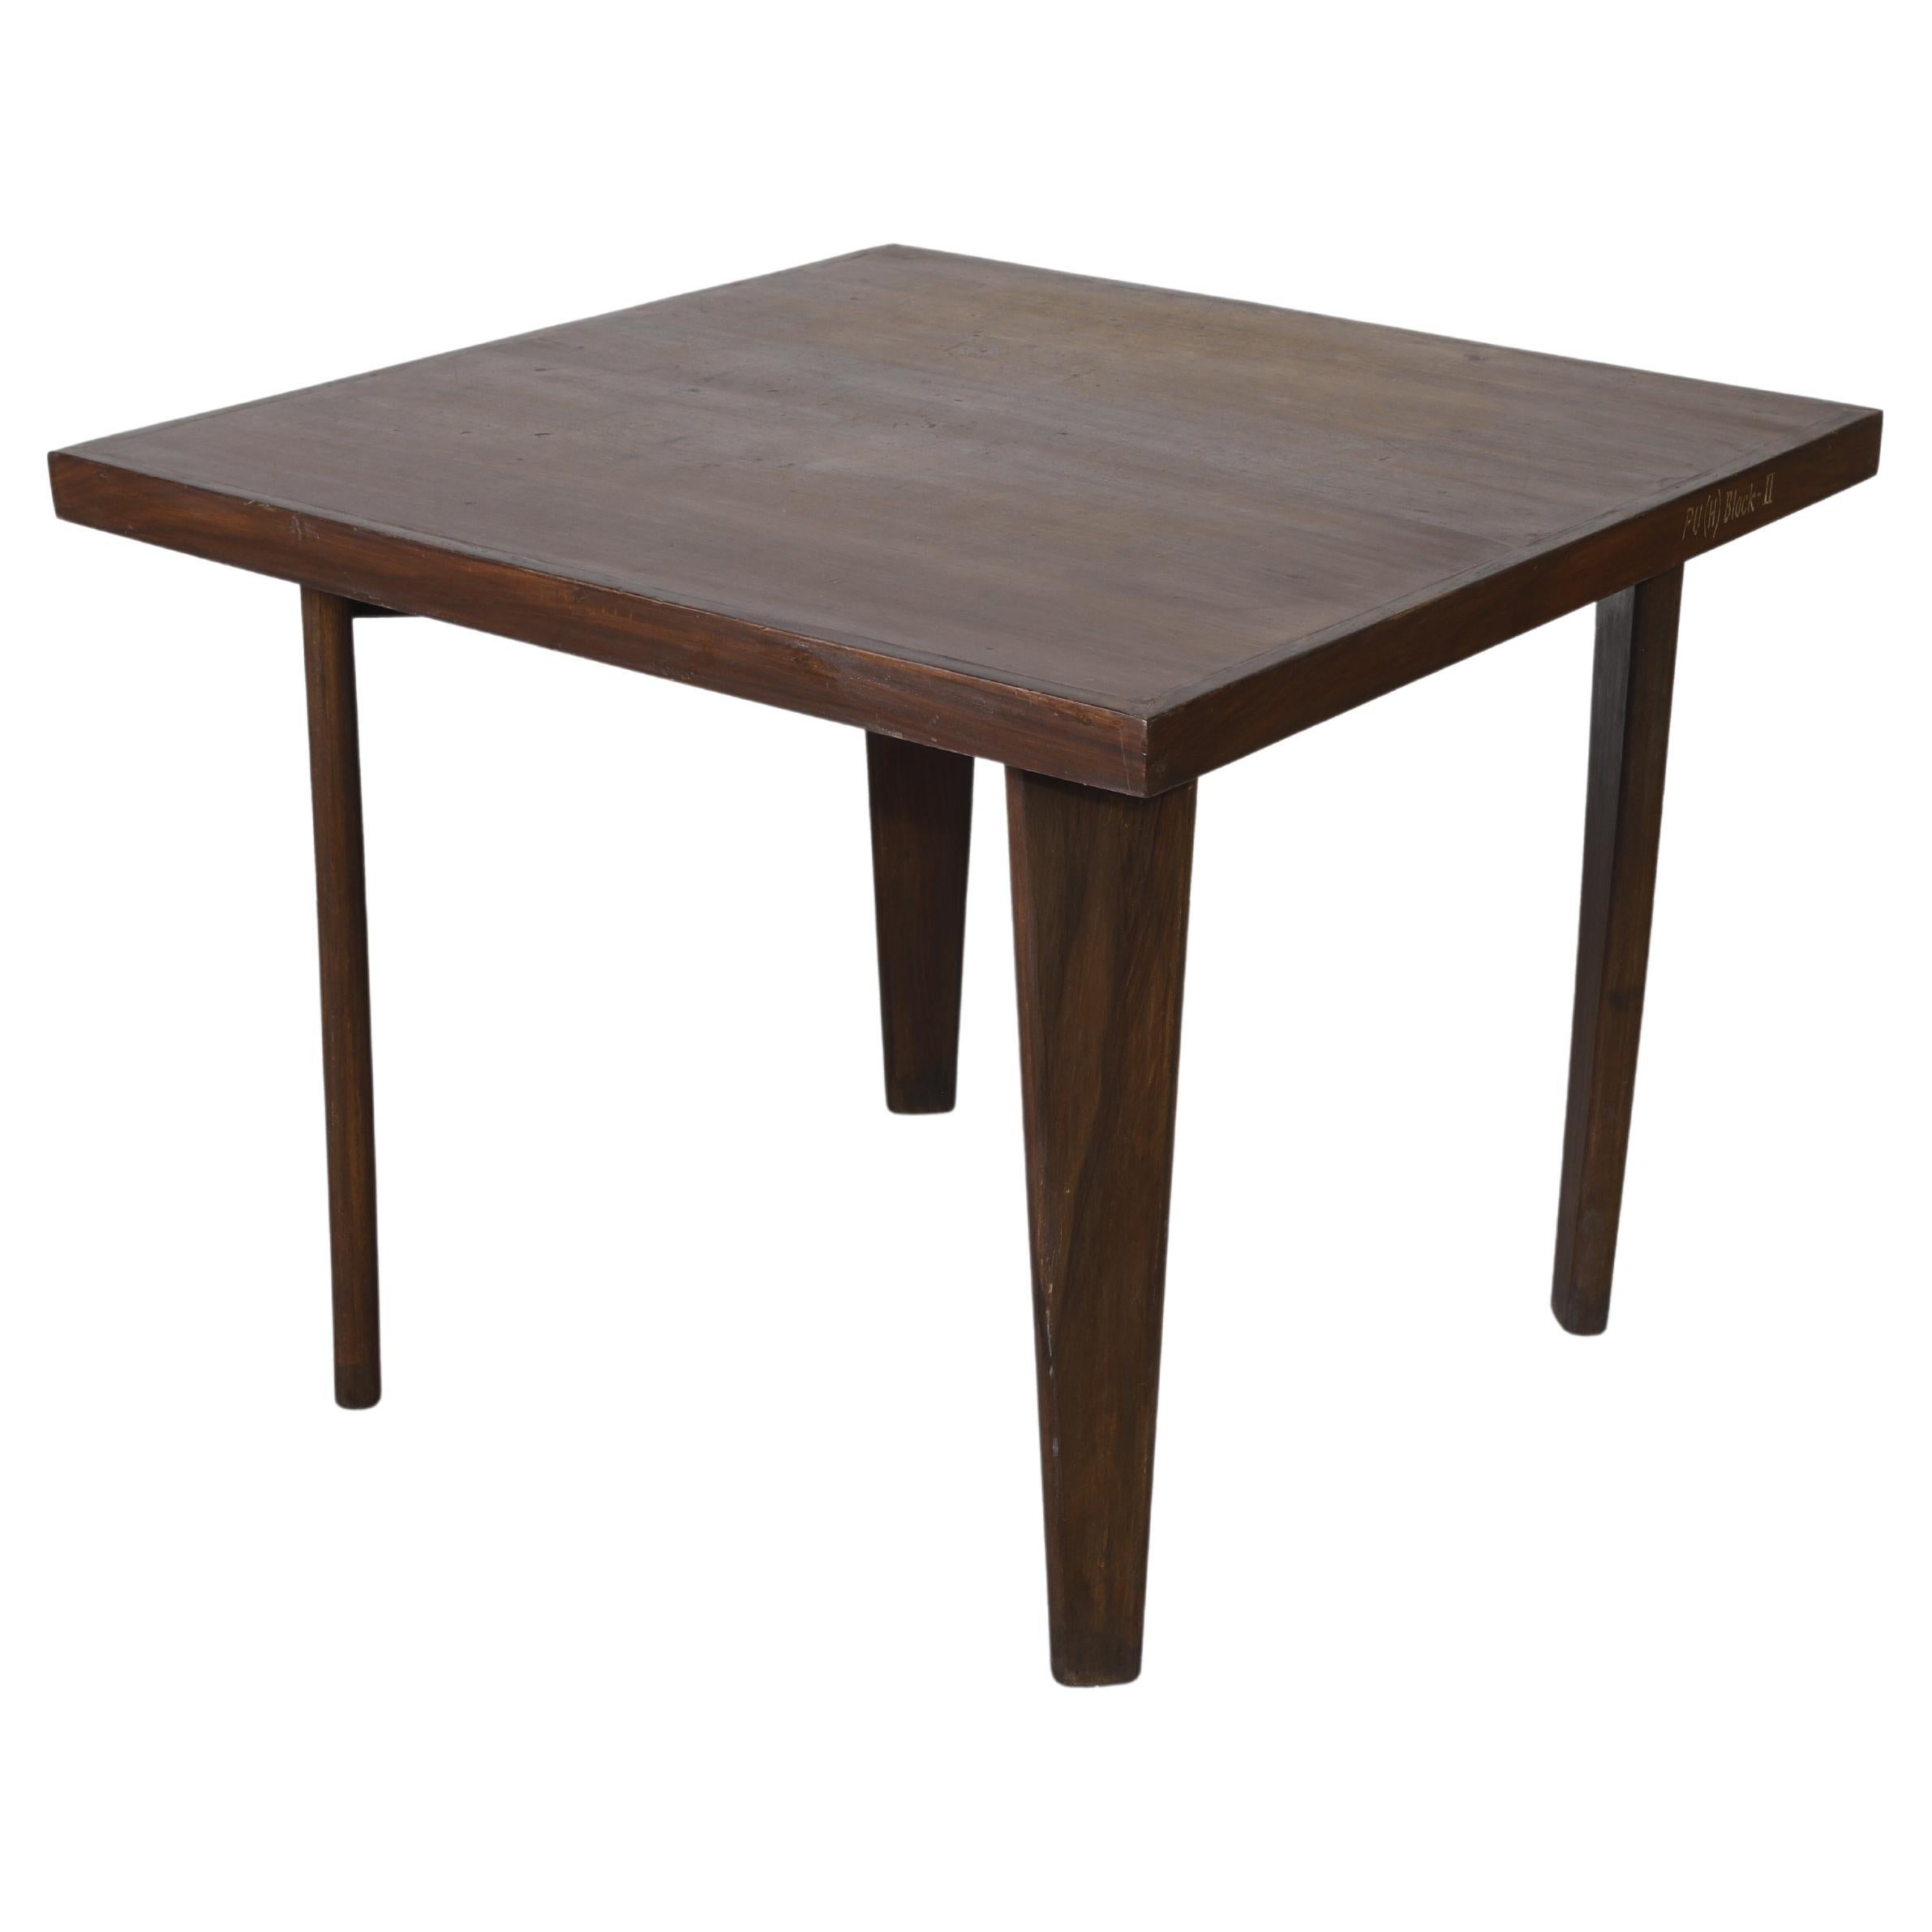 Pierre Jeanneret Mid Century Square Office Table Desk for Chandigarh India 1950s